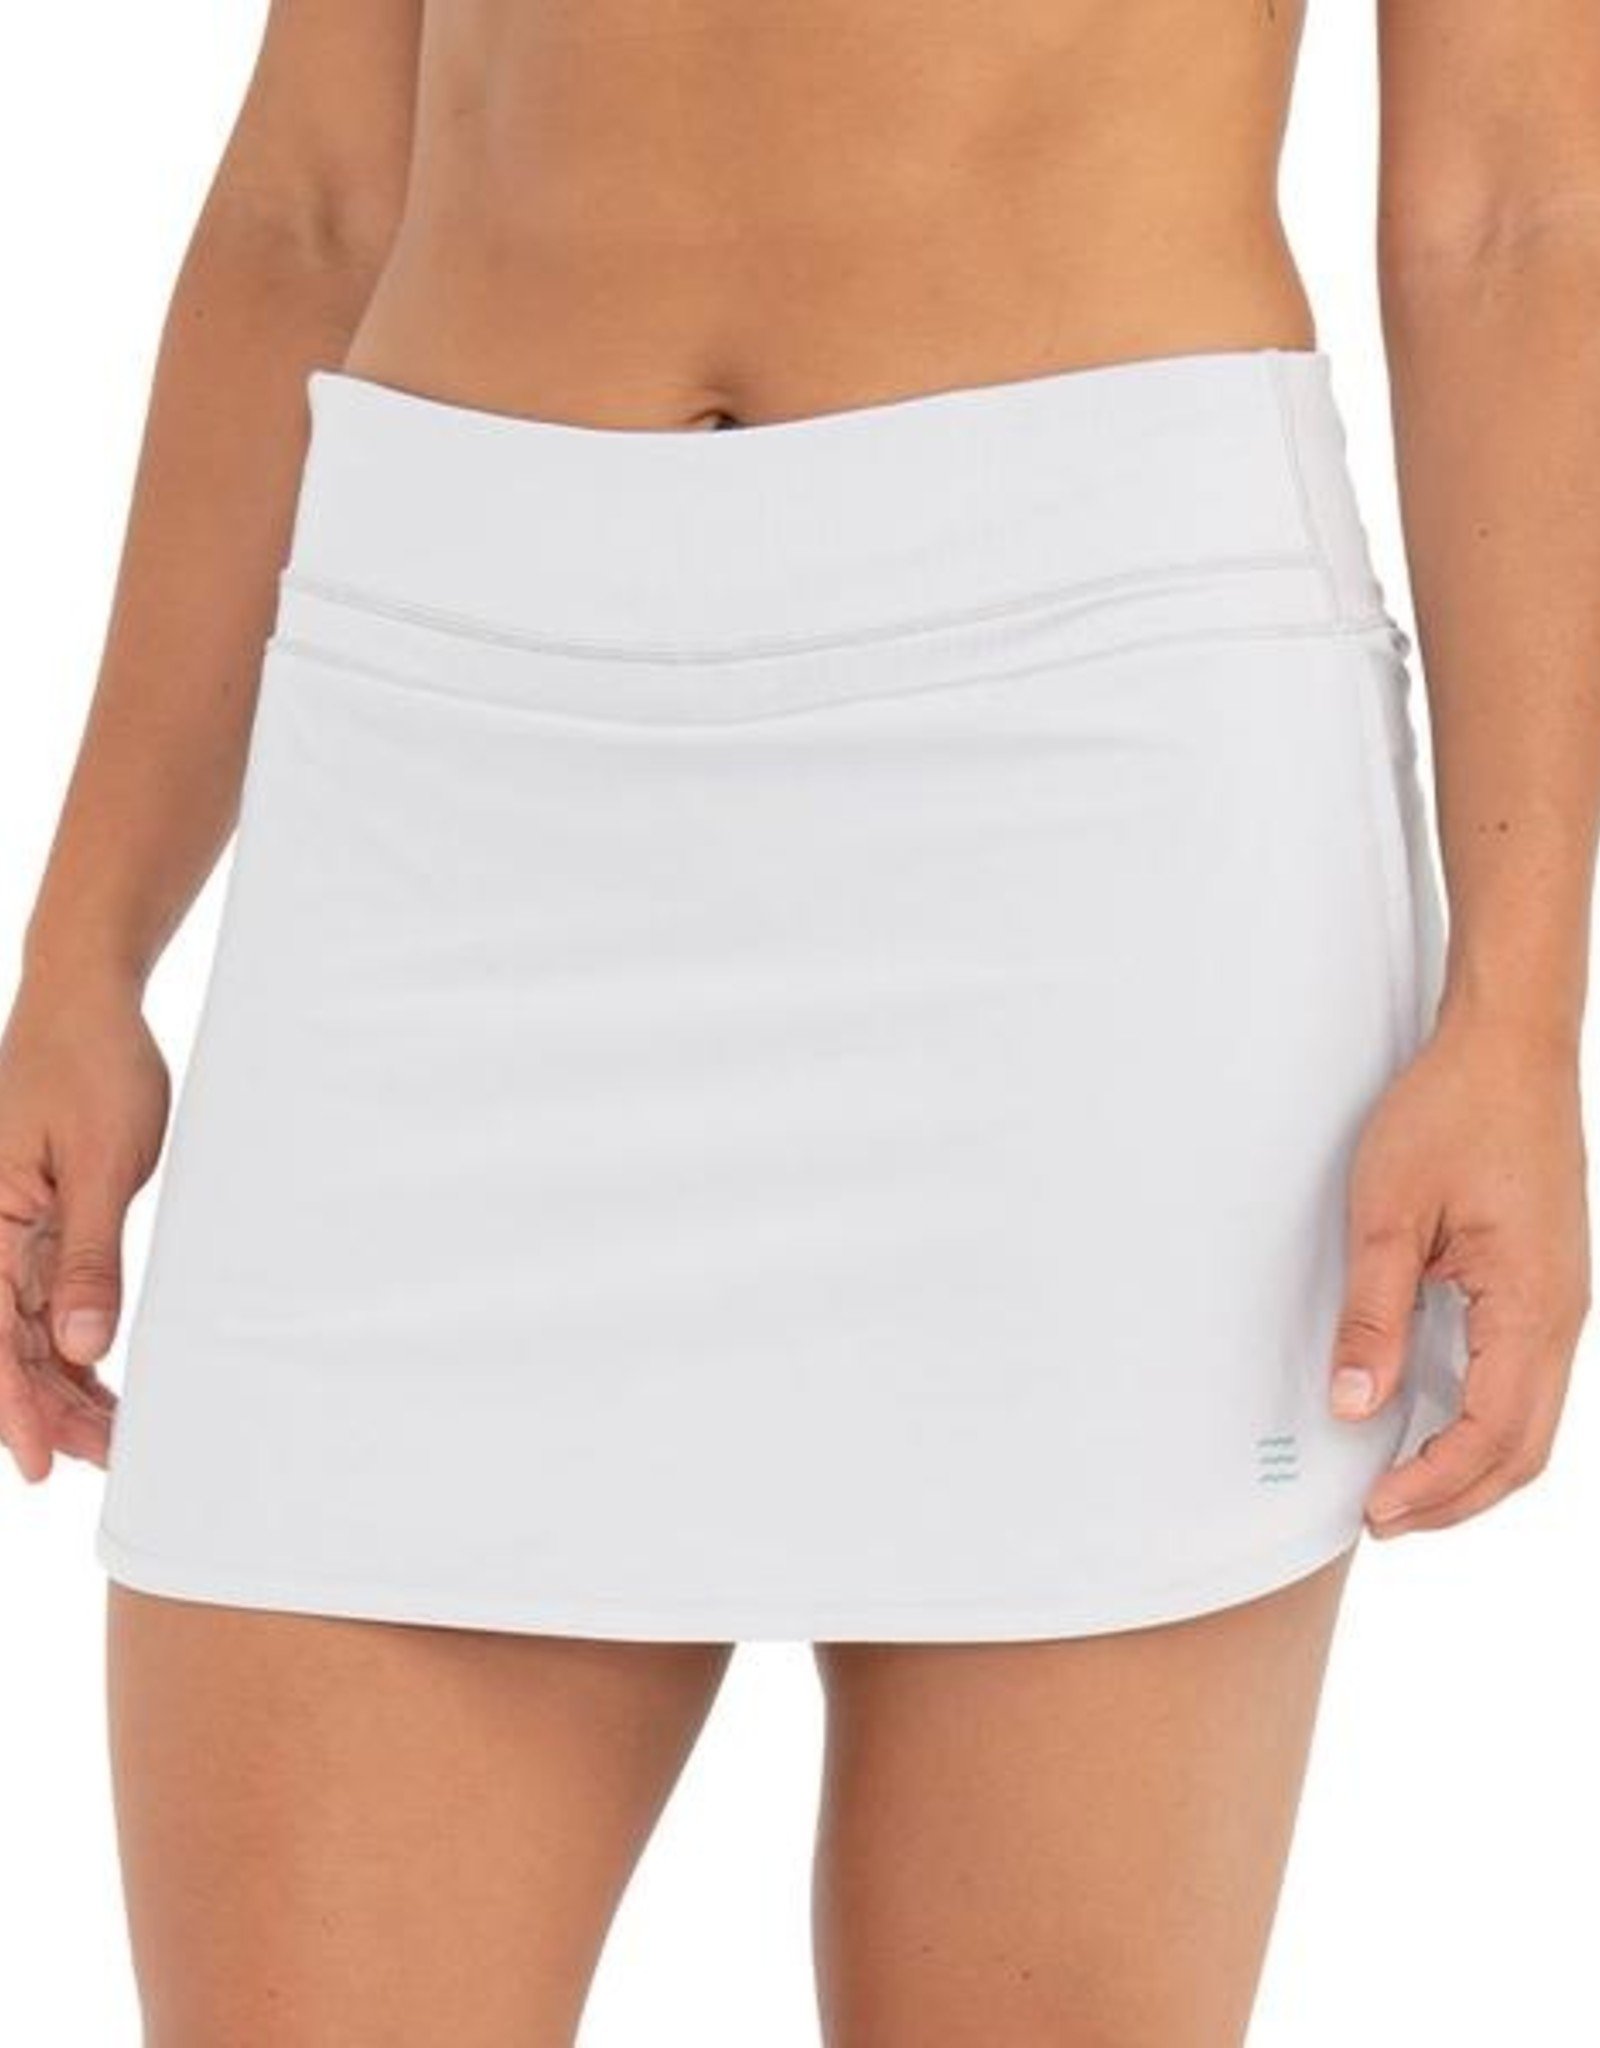 Free Fly Bamboo-Lined Breeze Skort